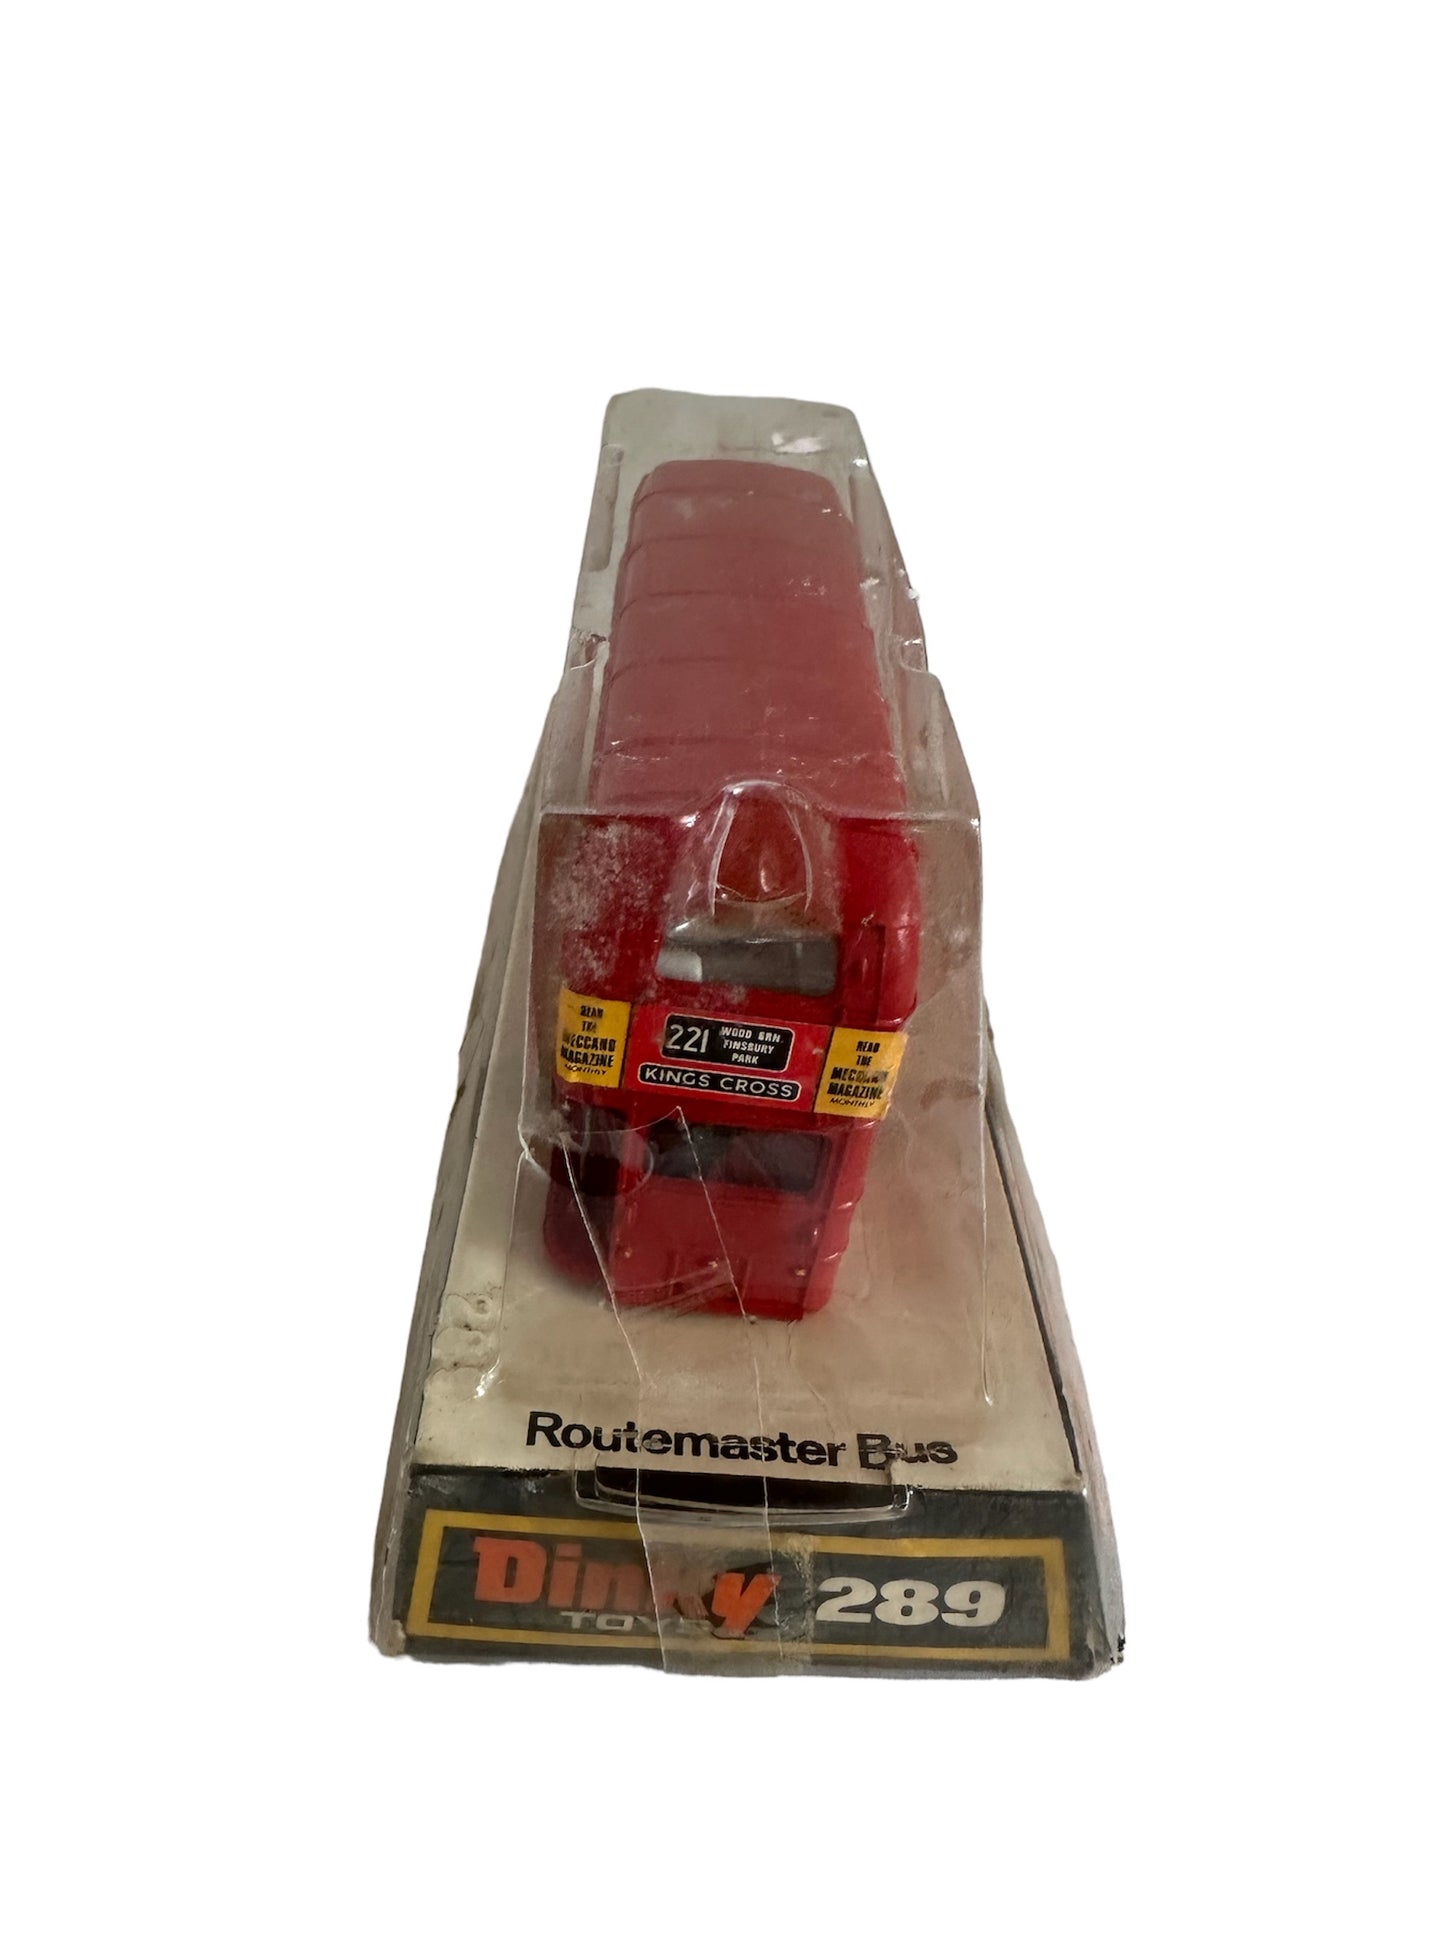 Vintage 1964 Dinky Die Cast Toys No. 289 First Release Routemaster Double Decker Bus 1/43 Scale Replica Vehicle In The Original Packaging - Shop Stock Room Find